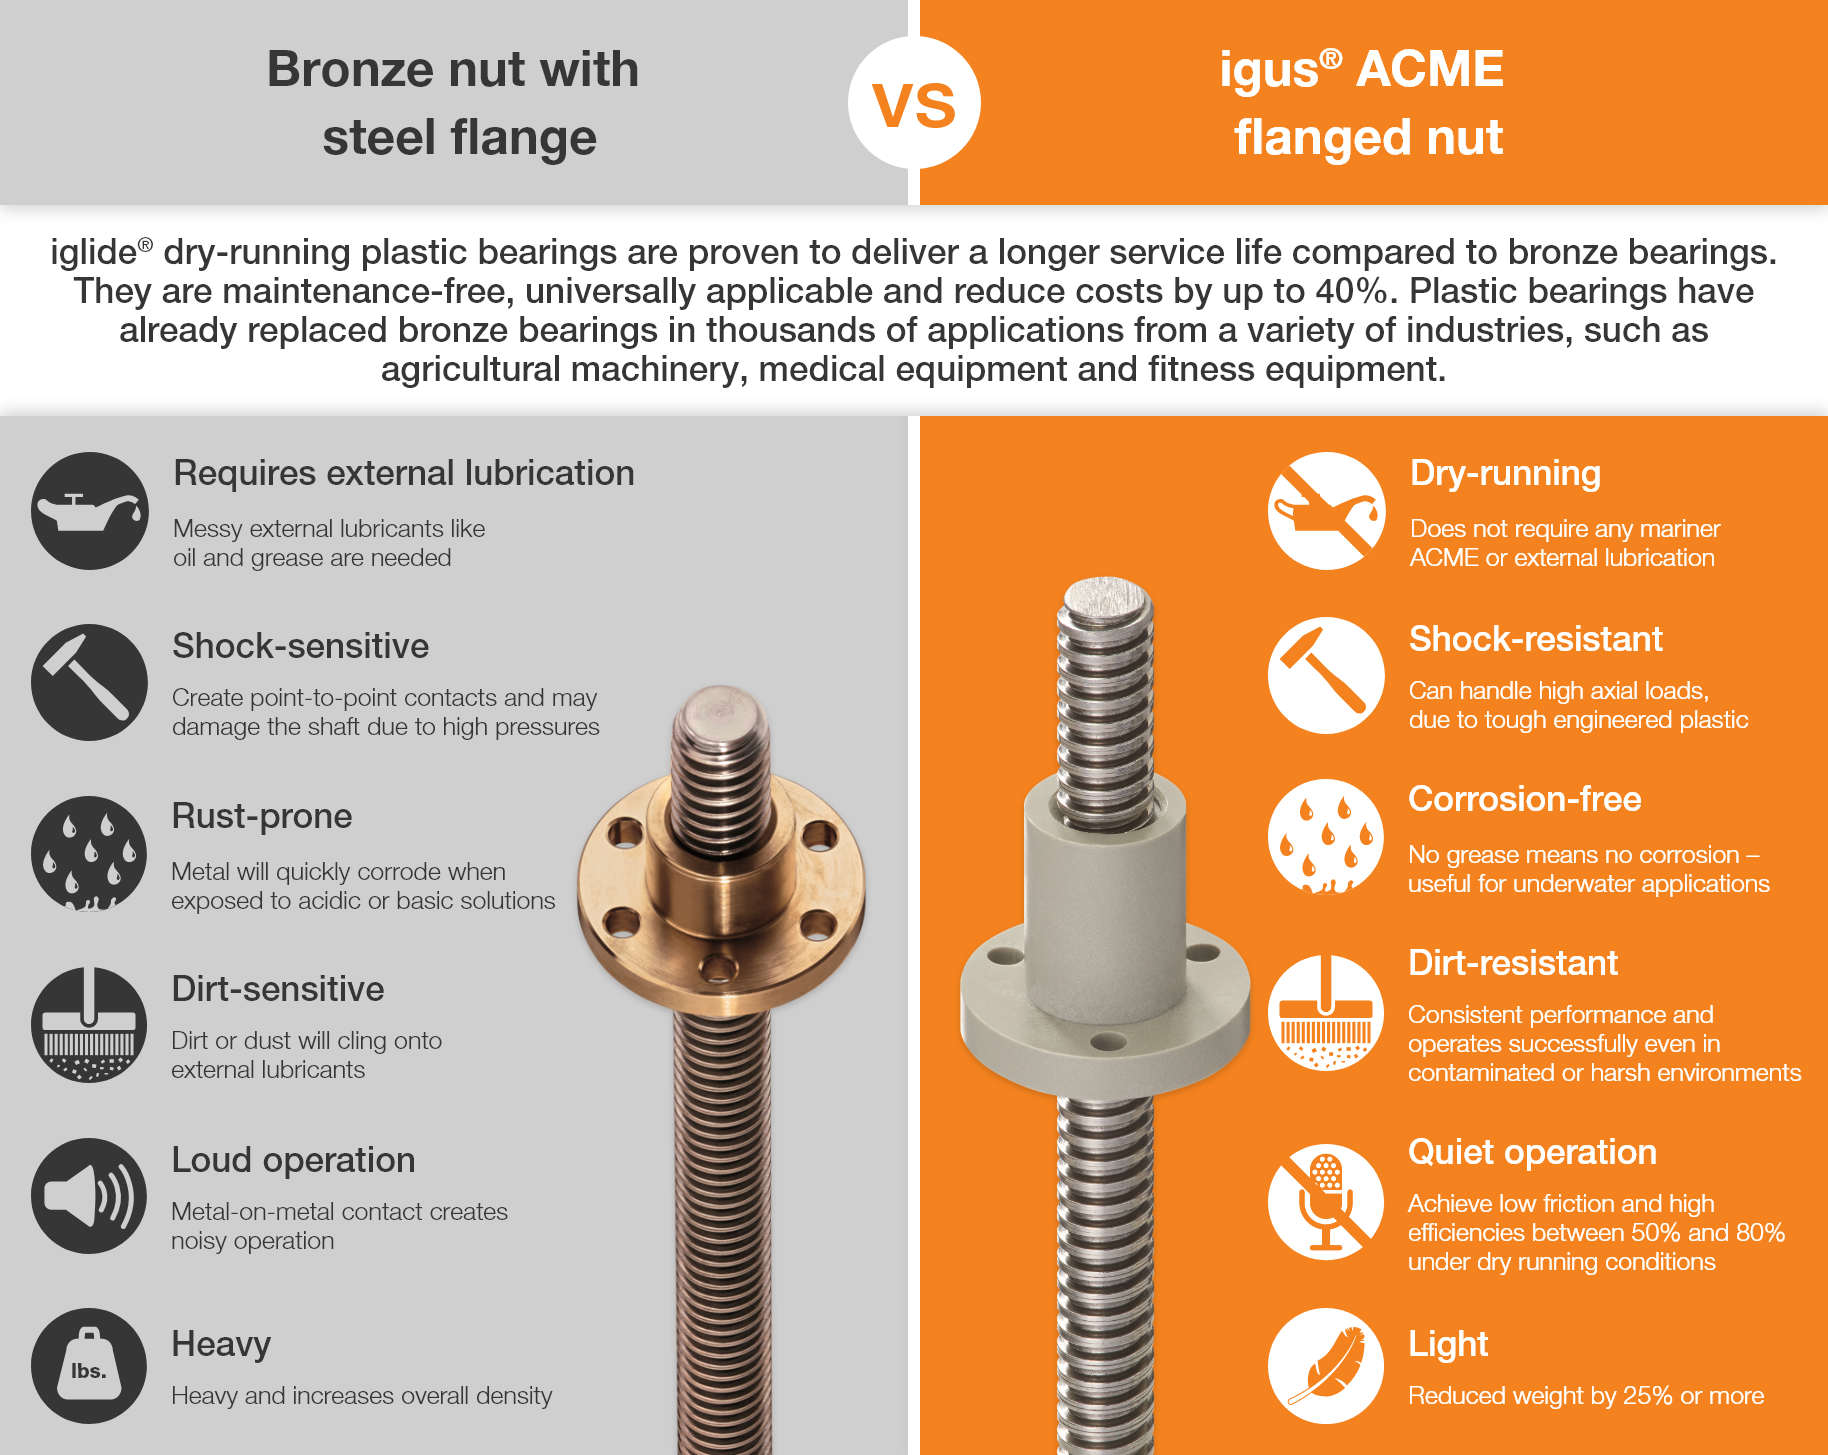 infographic difference between bronze nut with steel flange and igus ACME flanged nut